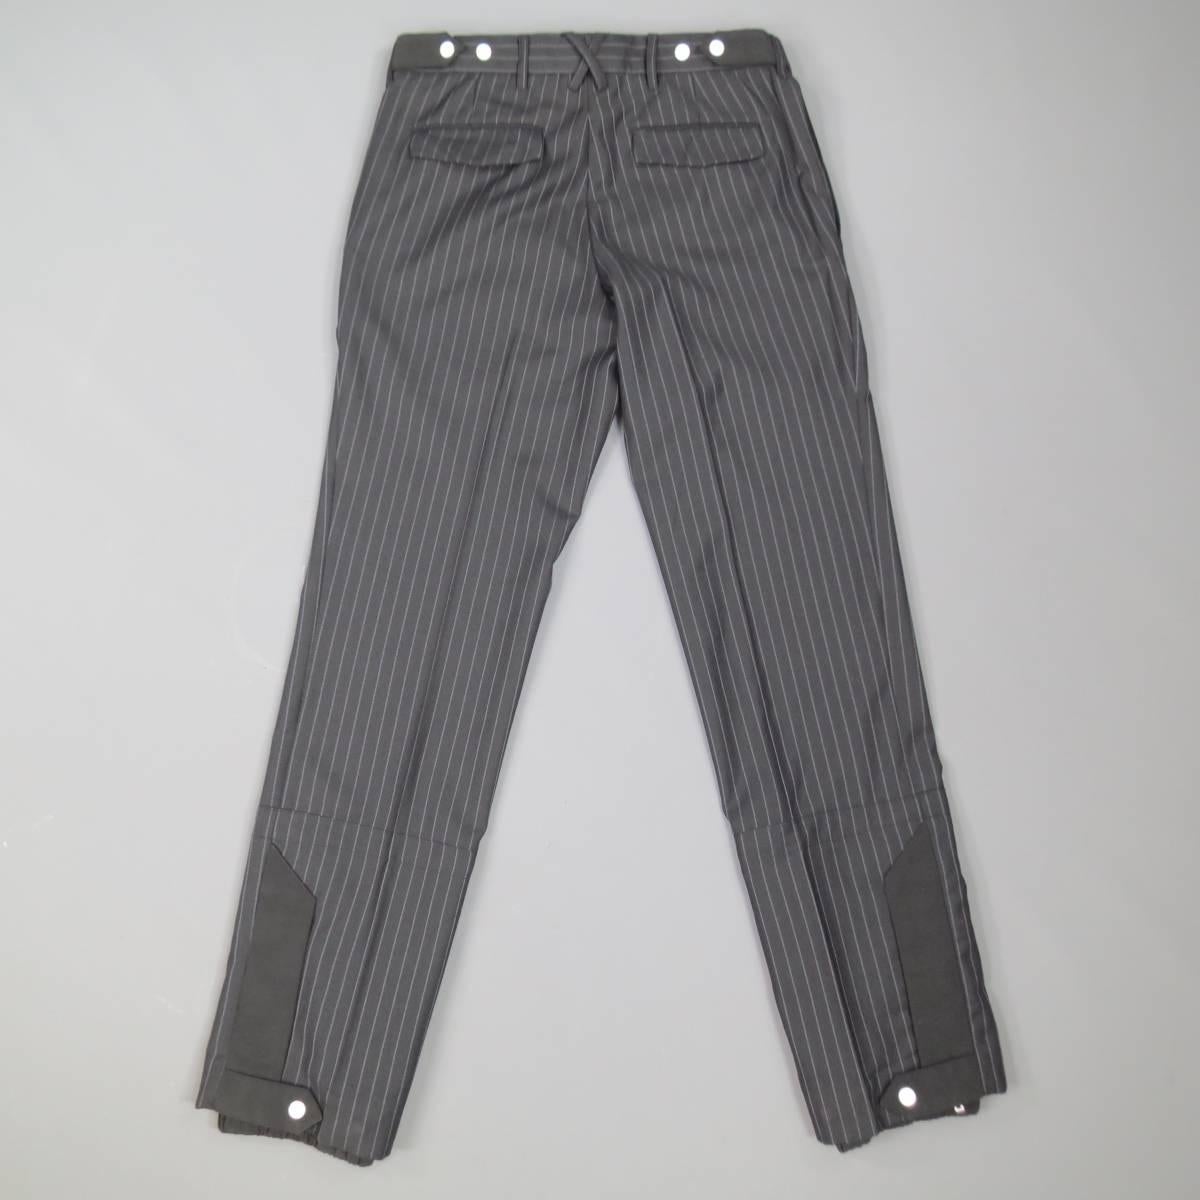 KRIS VAN ASSCHE Dress Pants consists of wool blend material in a black color toned. Designed with a zip-fly clasp closure, stripe pattern in a contrast white, side button closure pockets. Detailed with snap/zipper closure and elastic jogger on leg